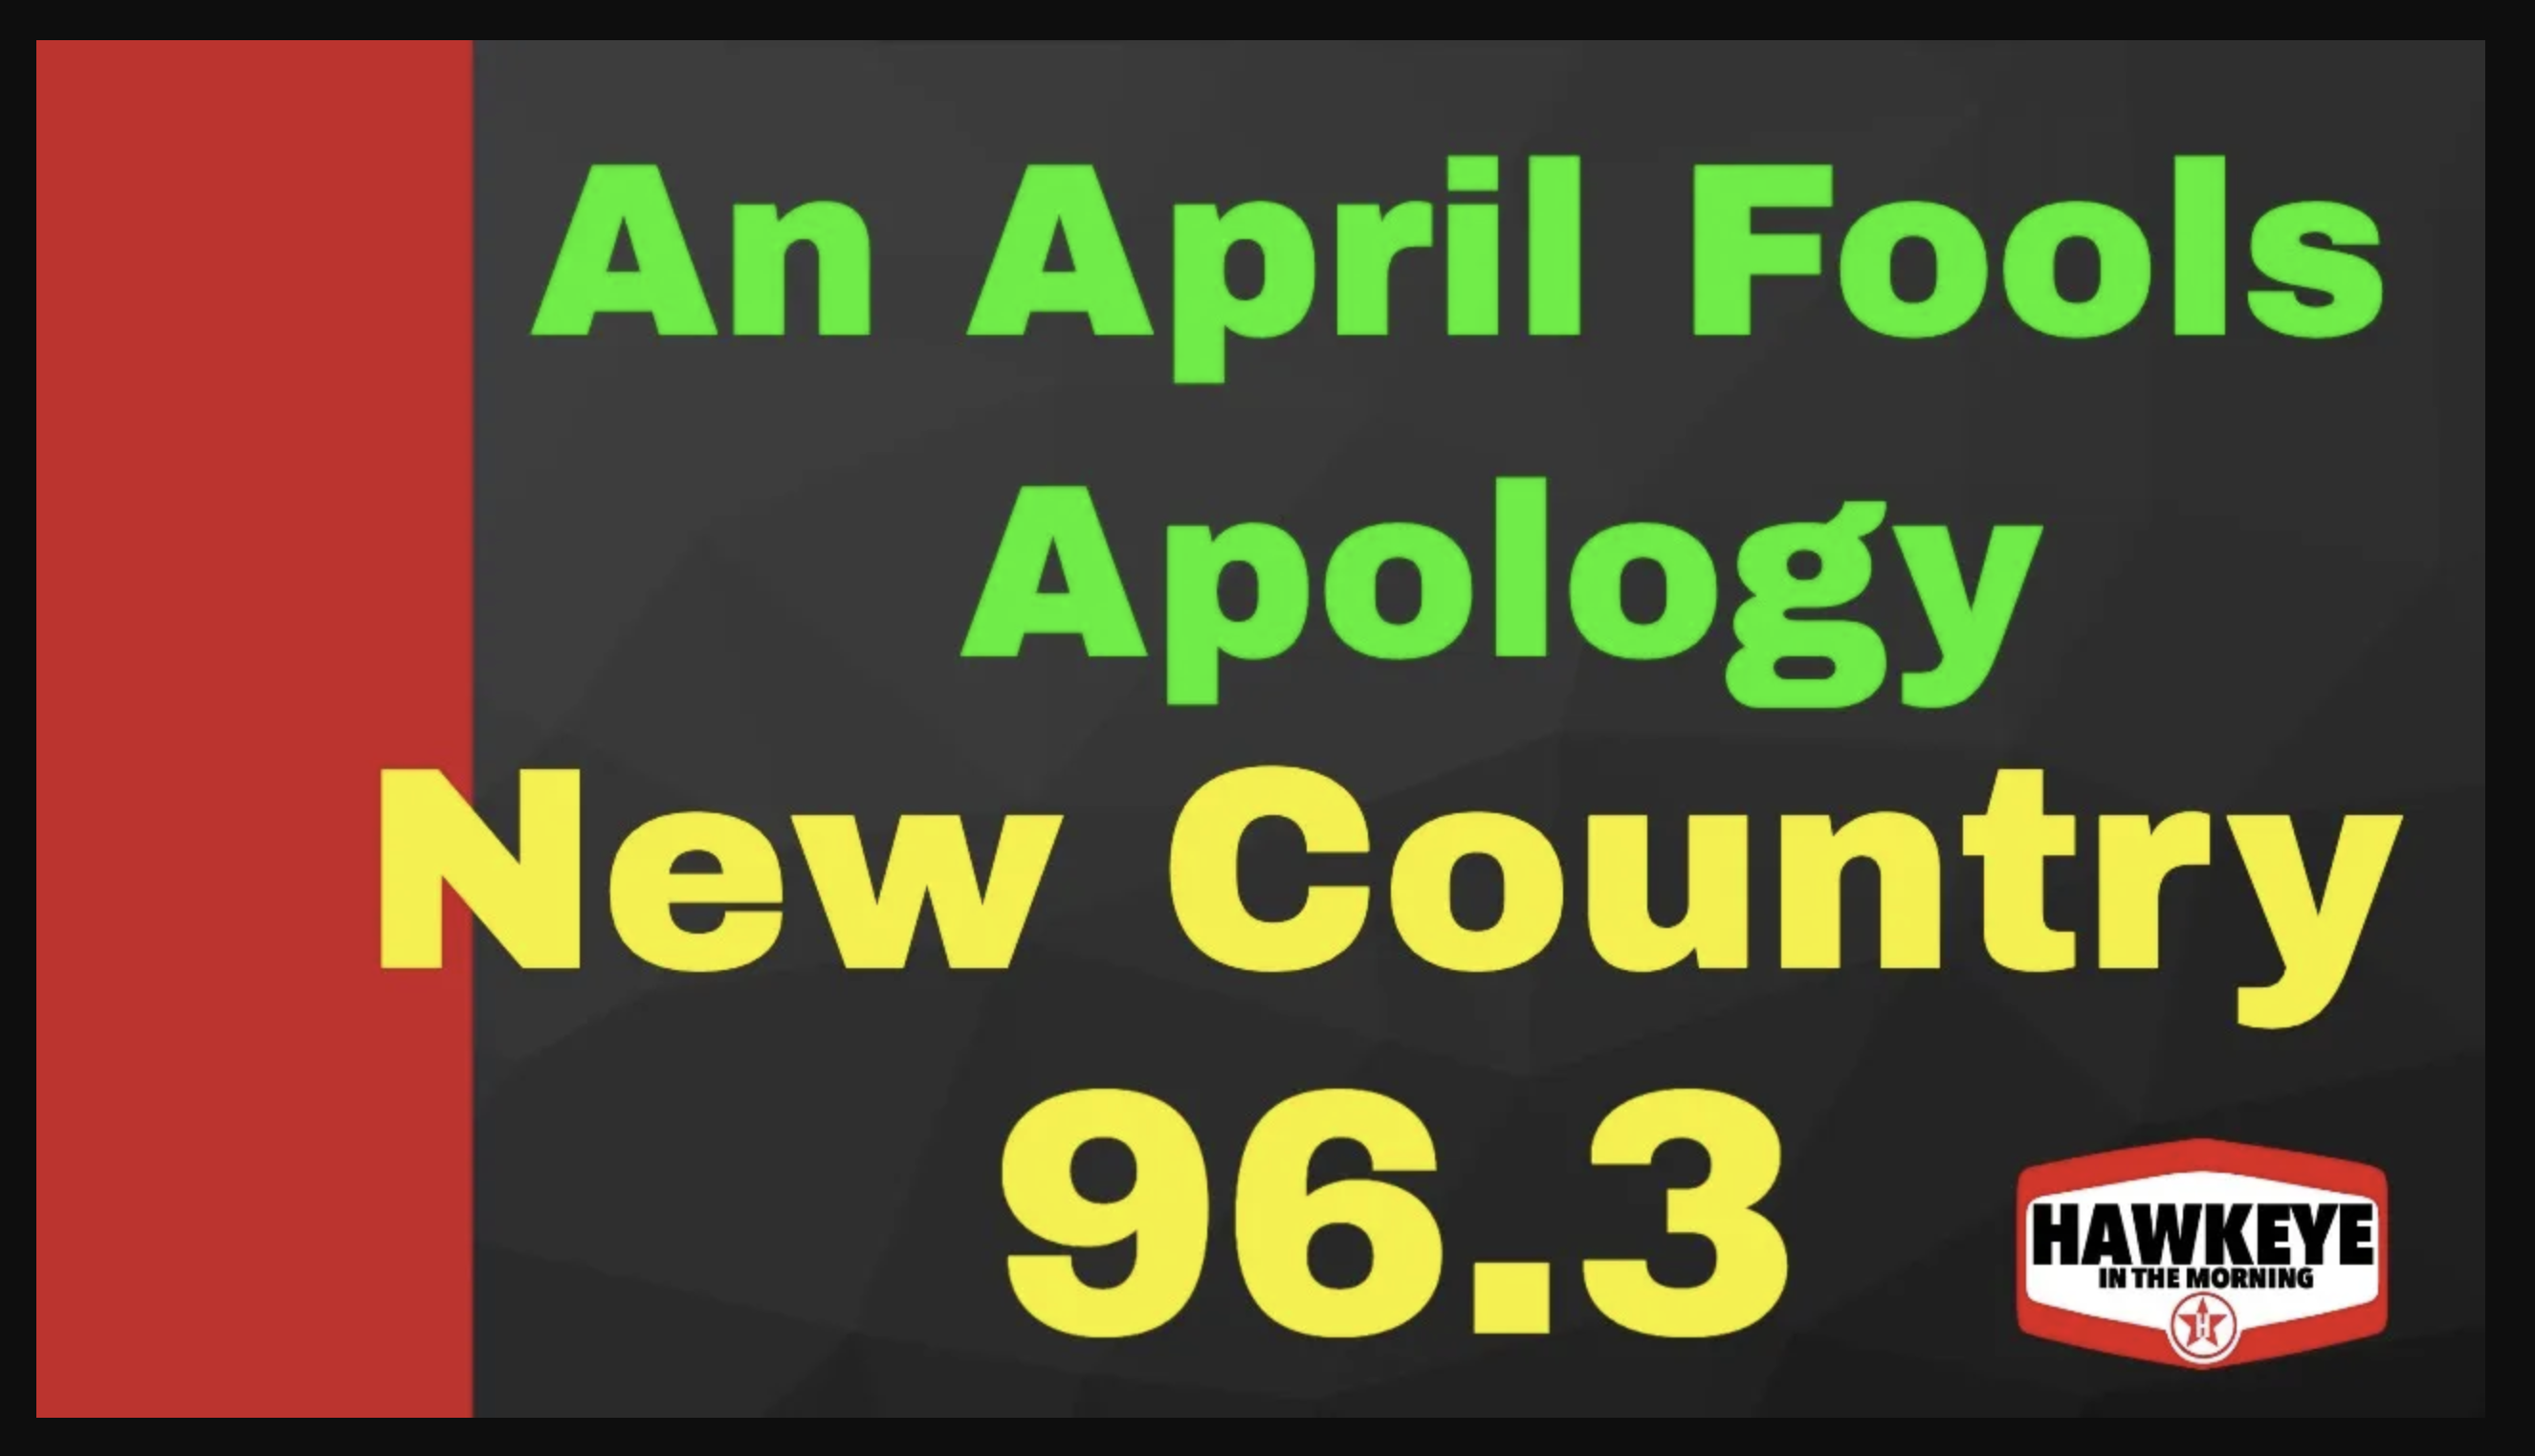 Another April Fools Joke – Another Apology from Management